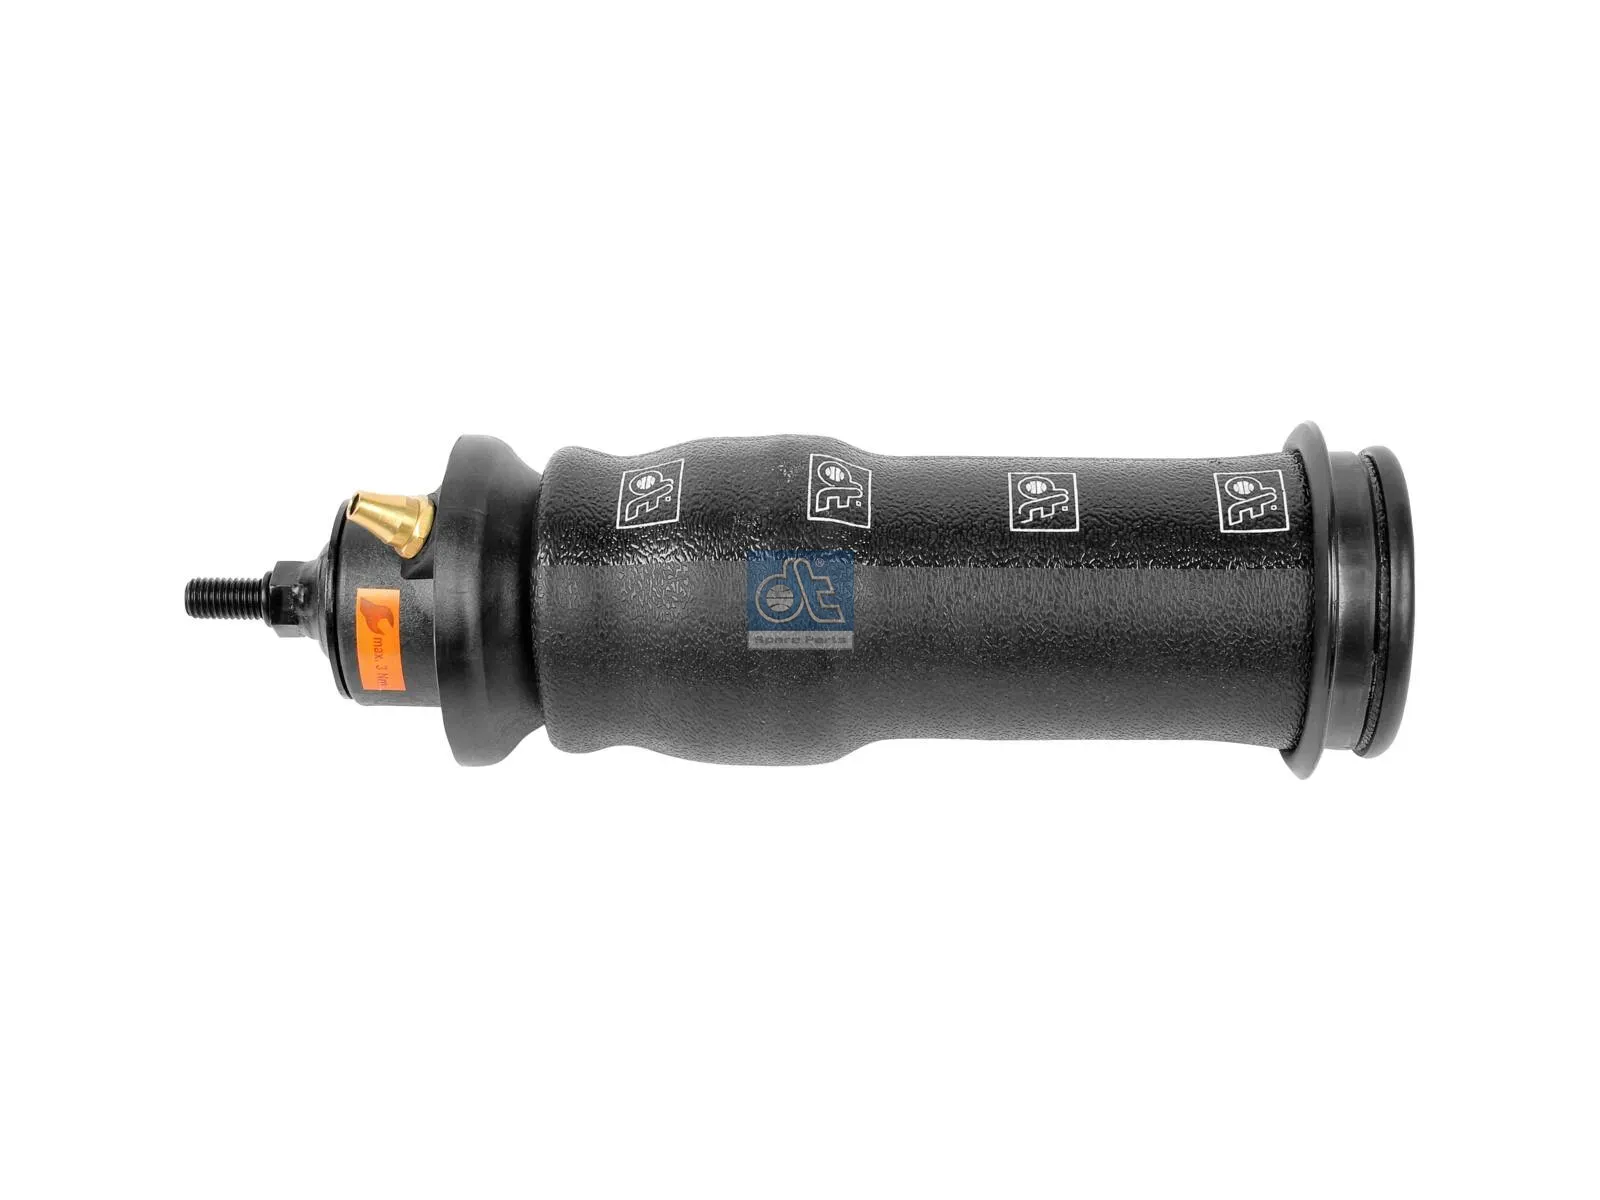 Cabin shock absorber, with air bellow